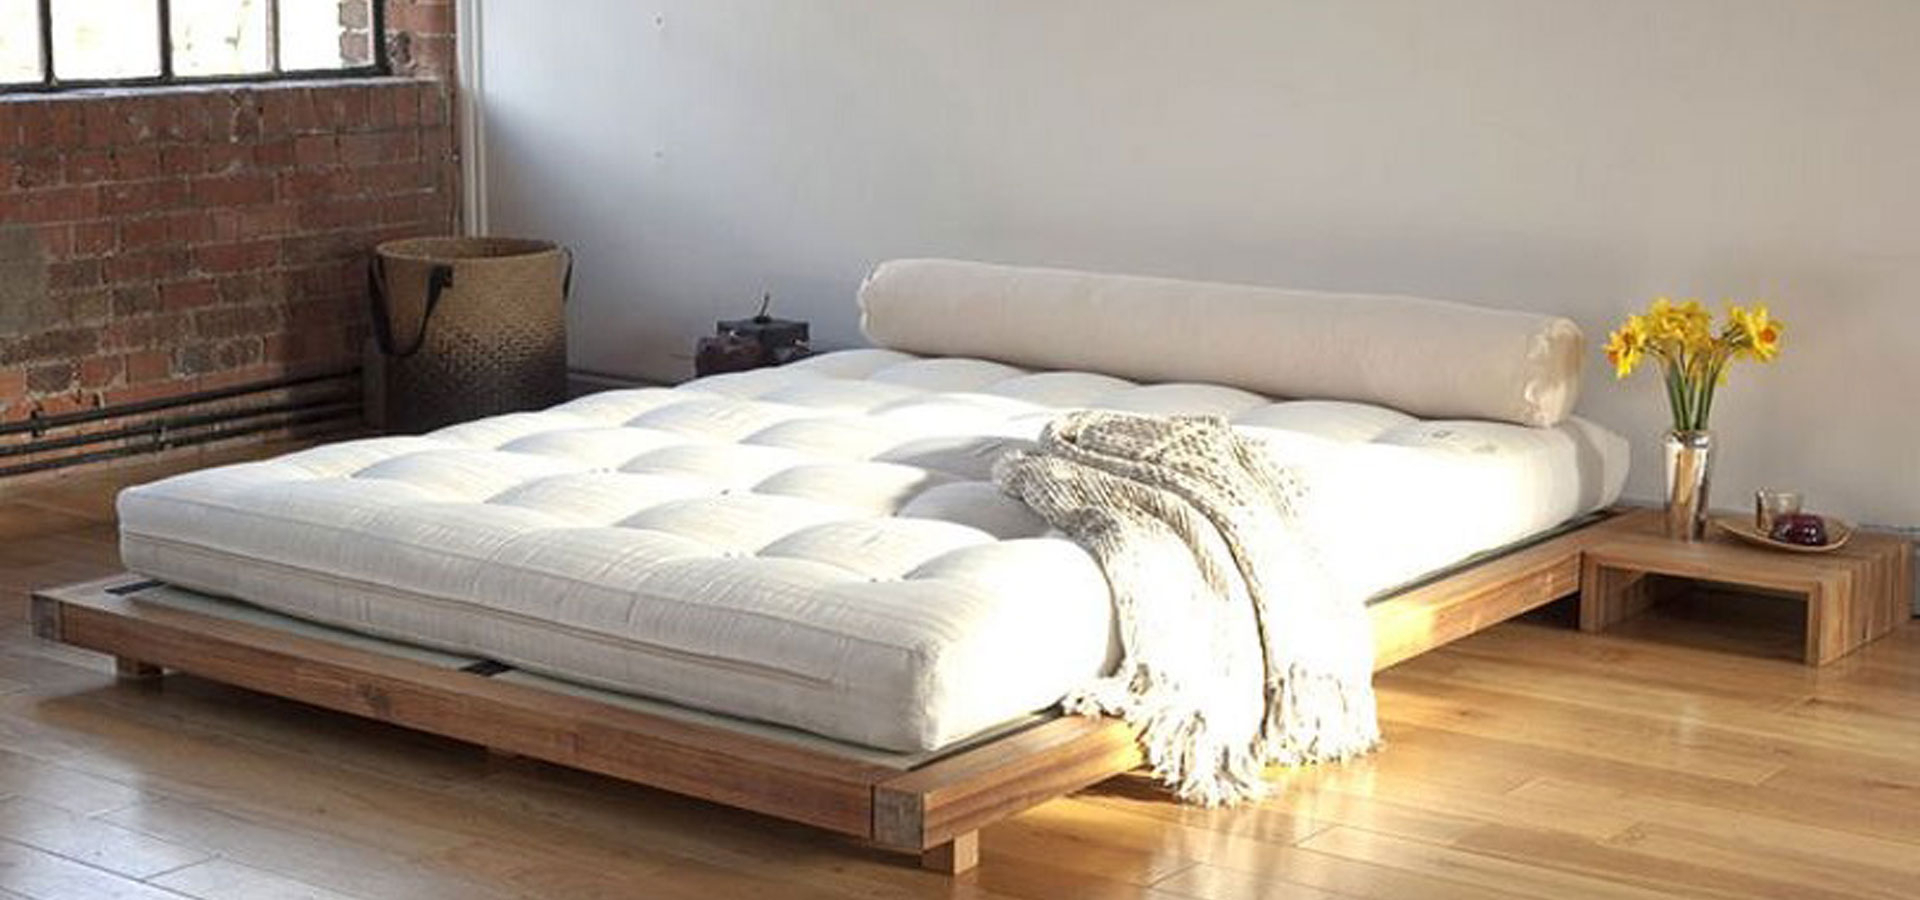 low profile mattress for bunk bed